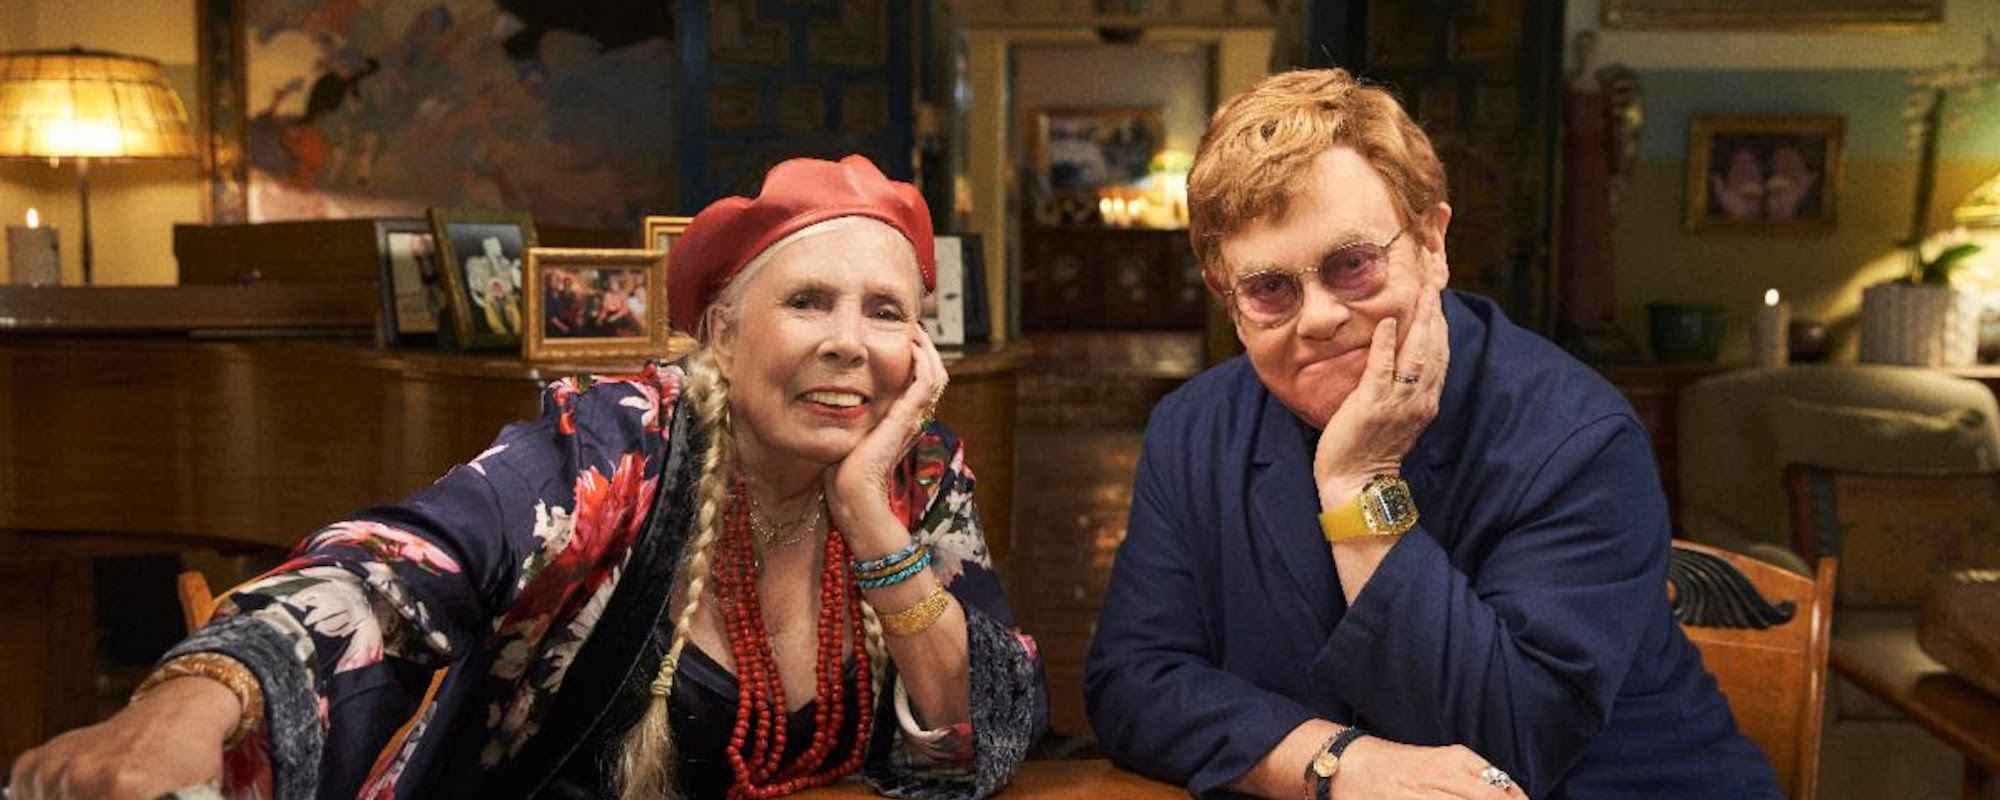 Joni Mitchell Tells Elton John About Newport Folk Festival Album, Recording in Her Bedroom and Why Chuck Berry Was the “G.O.A.T.”